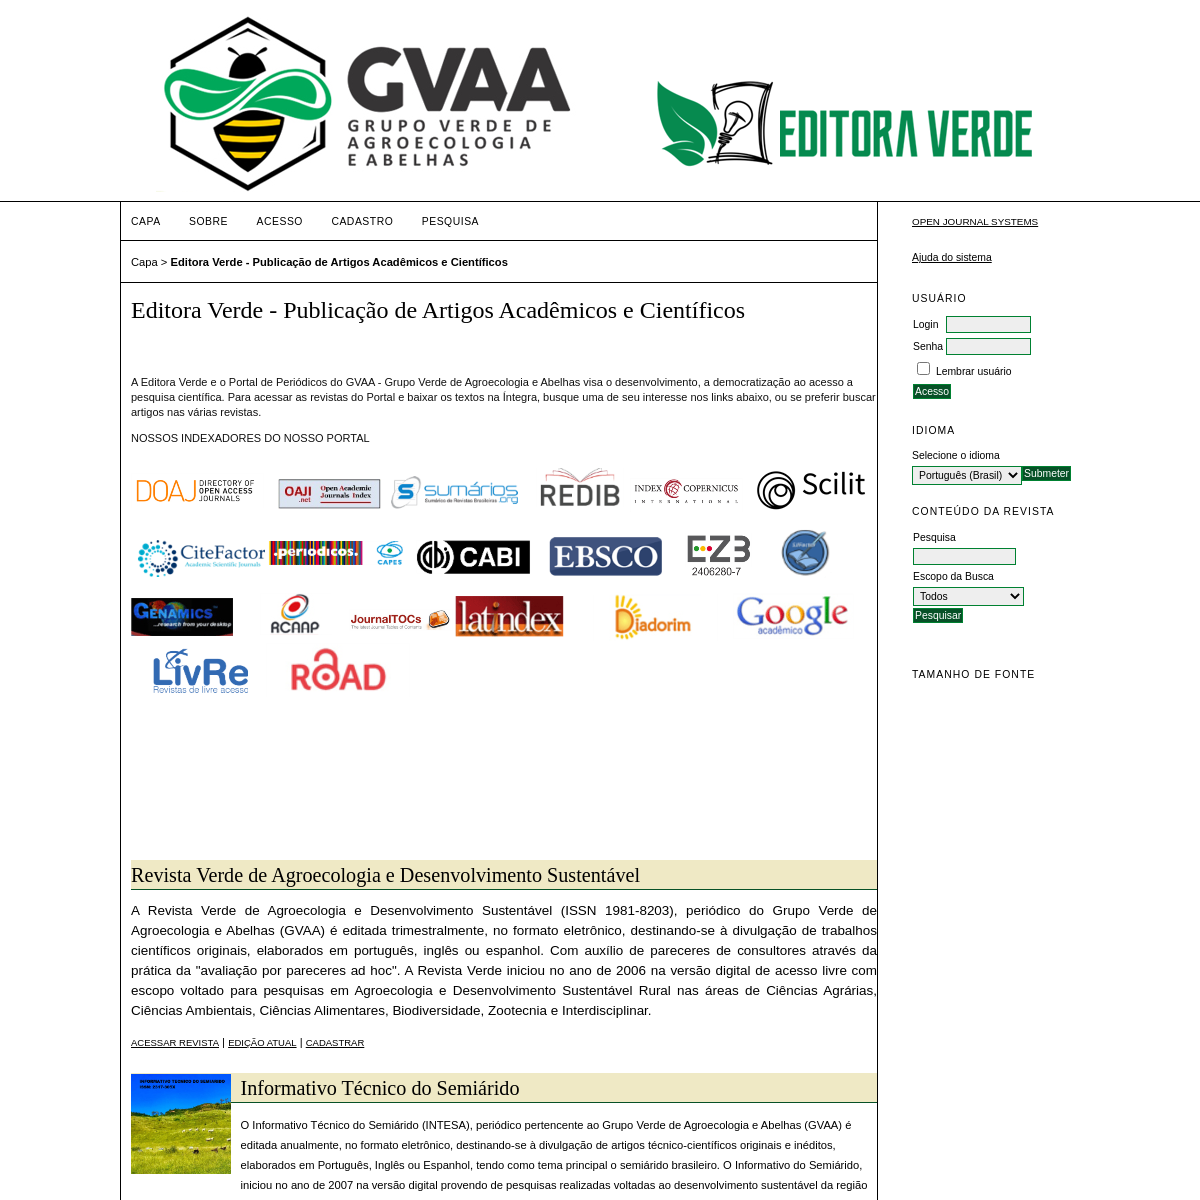 A complete backup of gvaa.com.br